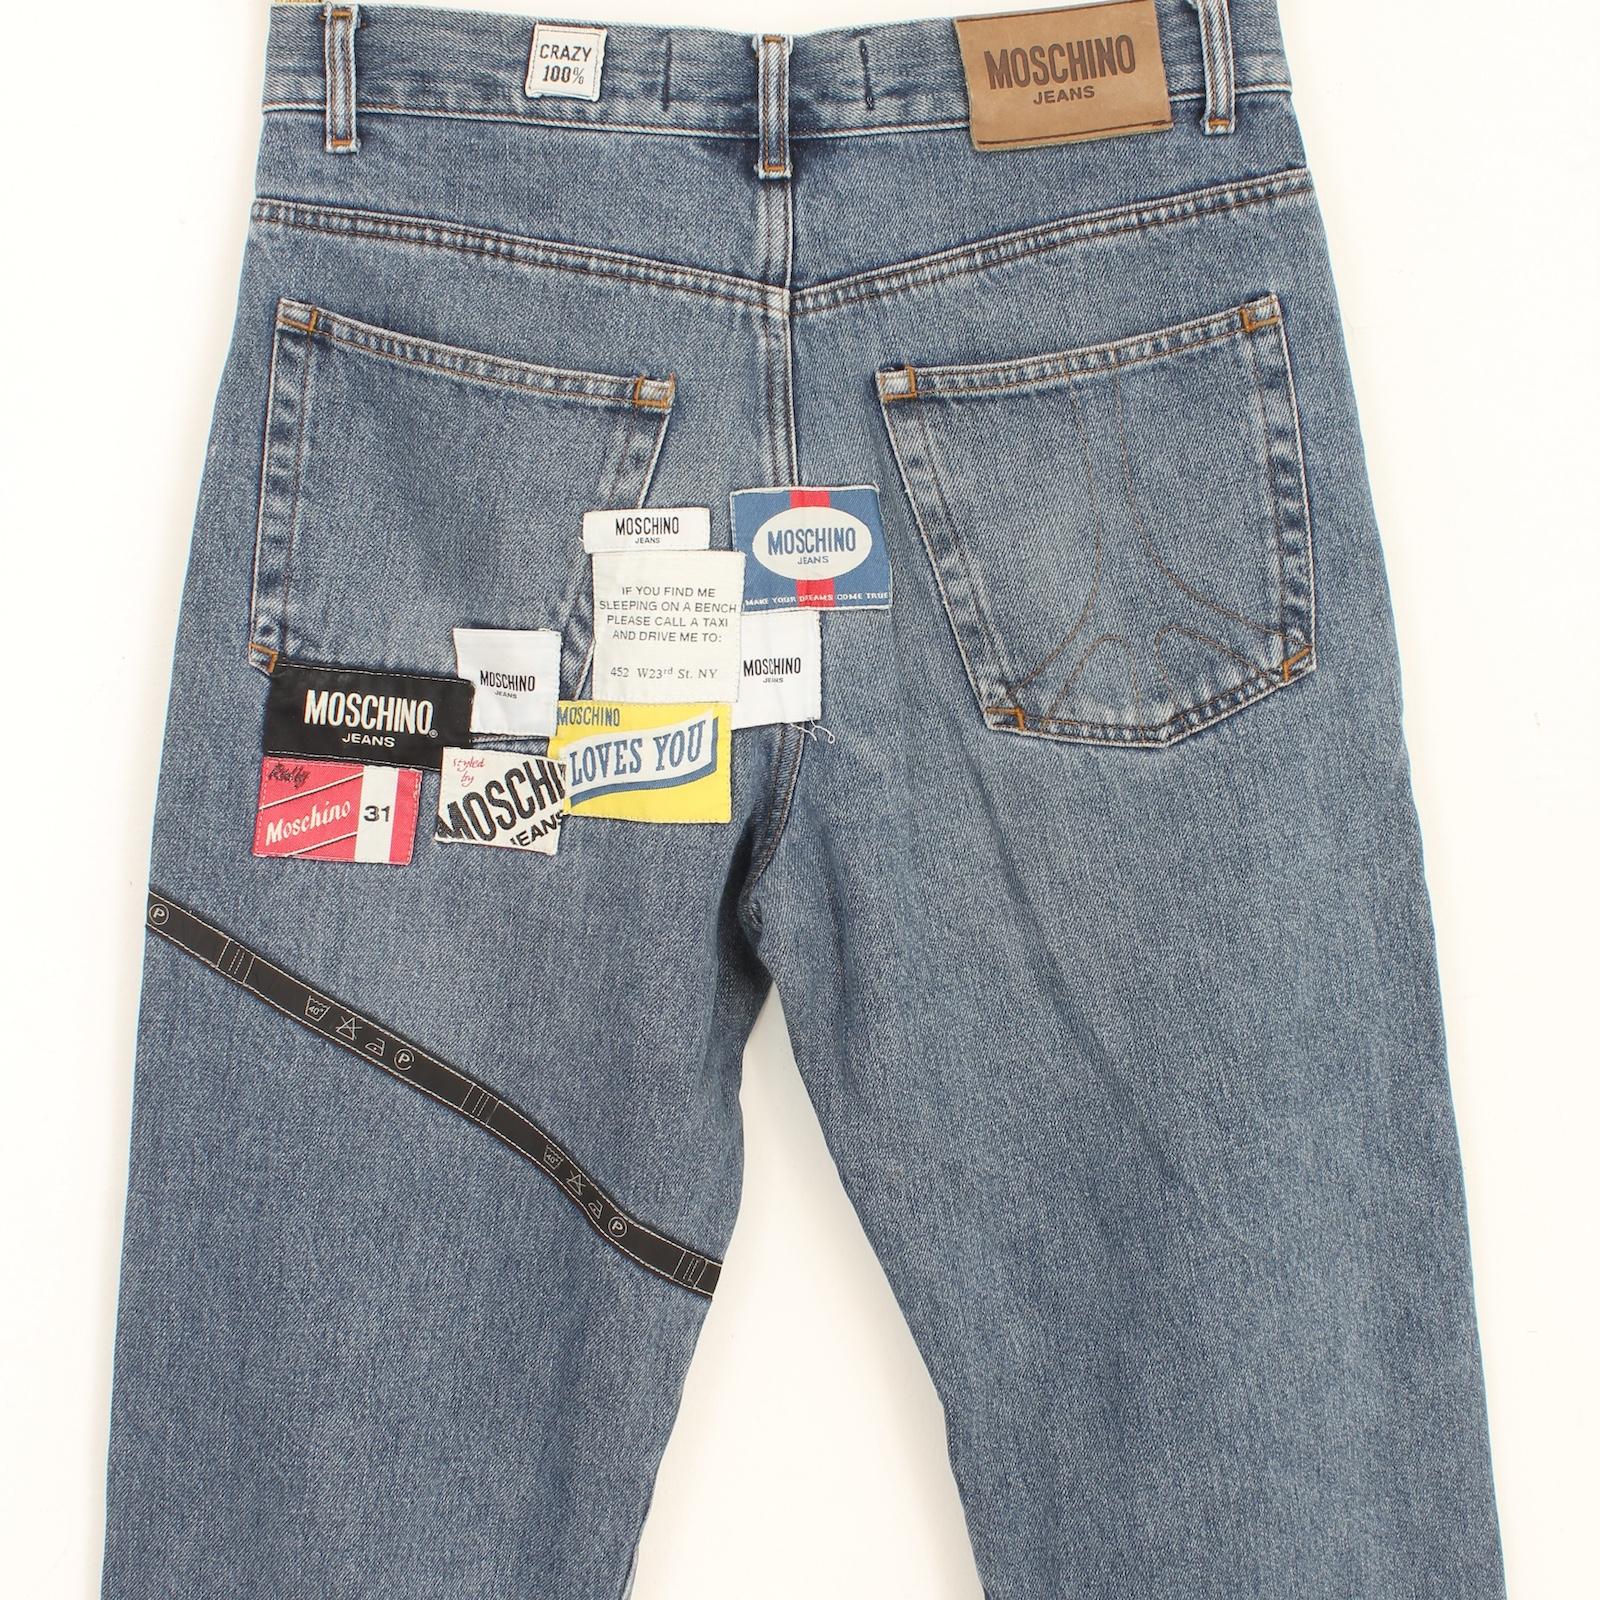 Moschino Patchwork Blue Jeans 2000s In Excellent Condition For Sale In Brindisi, Bt